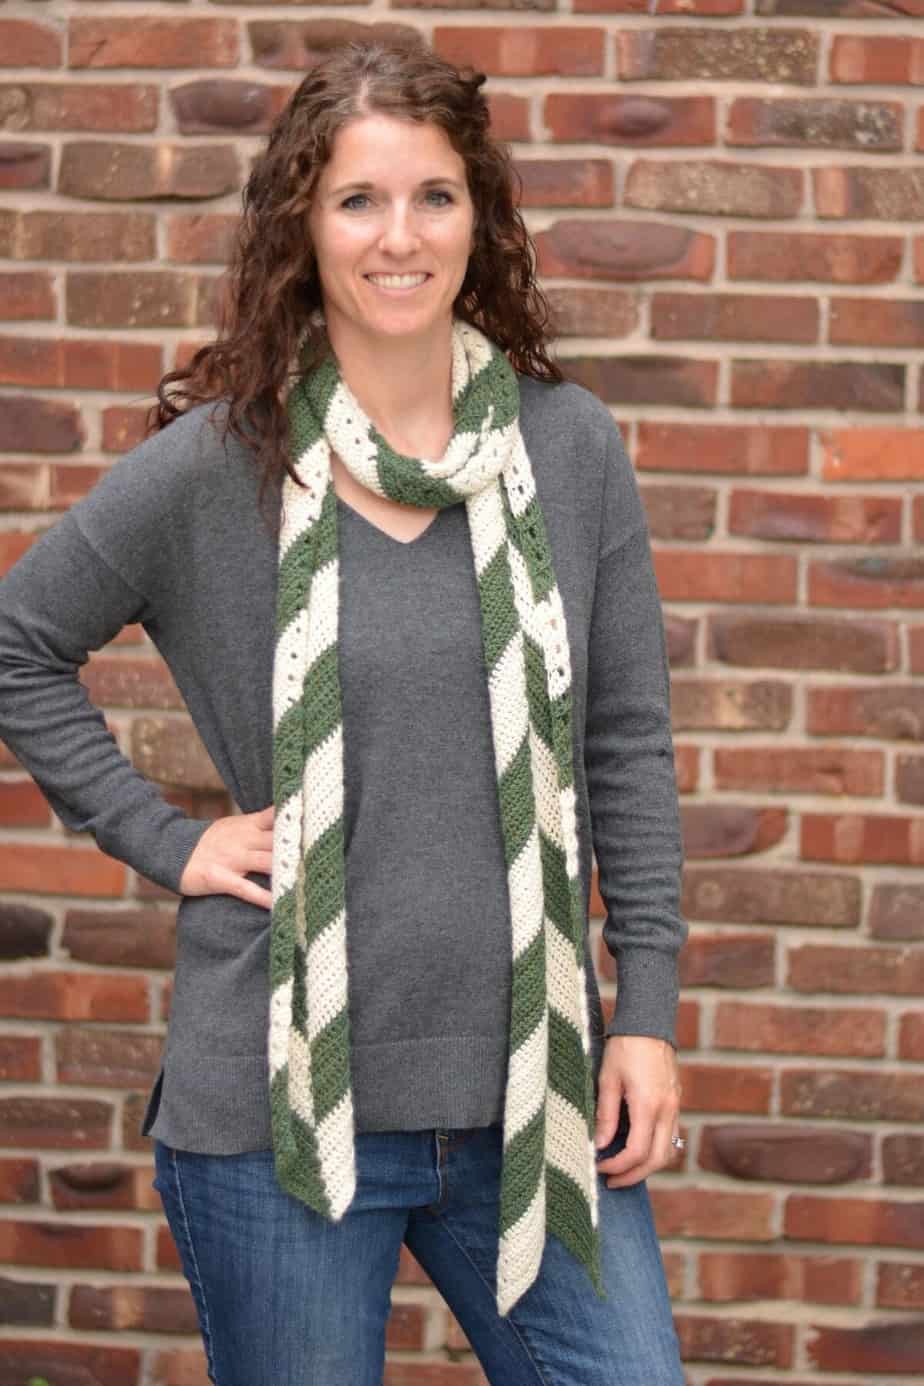 Woman earing write and green striped scarf.